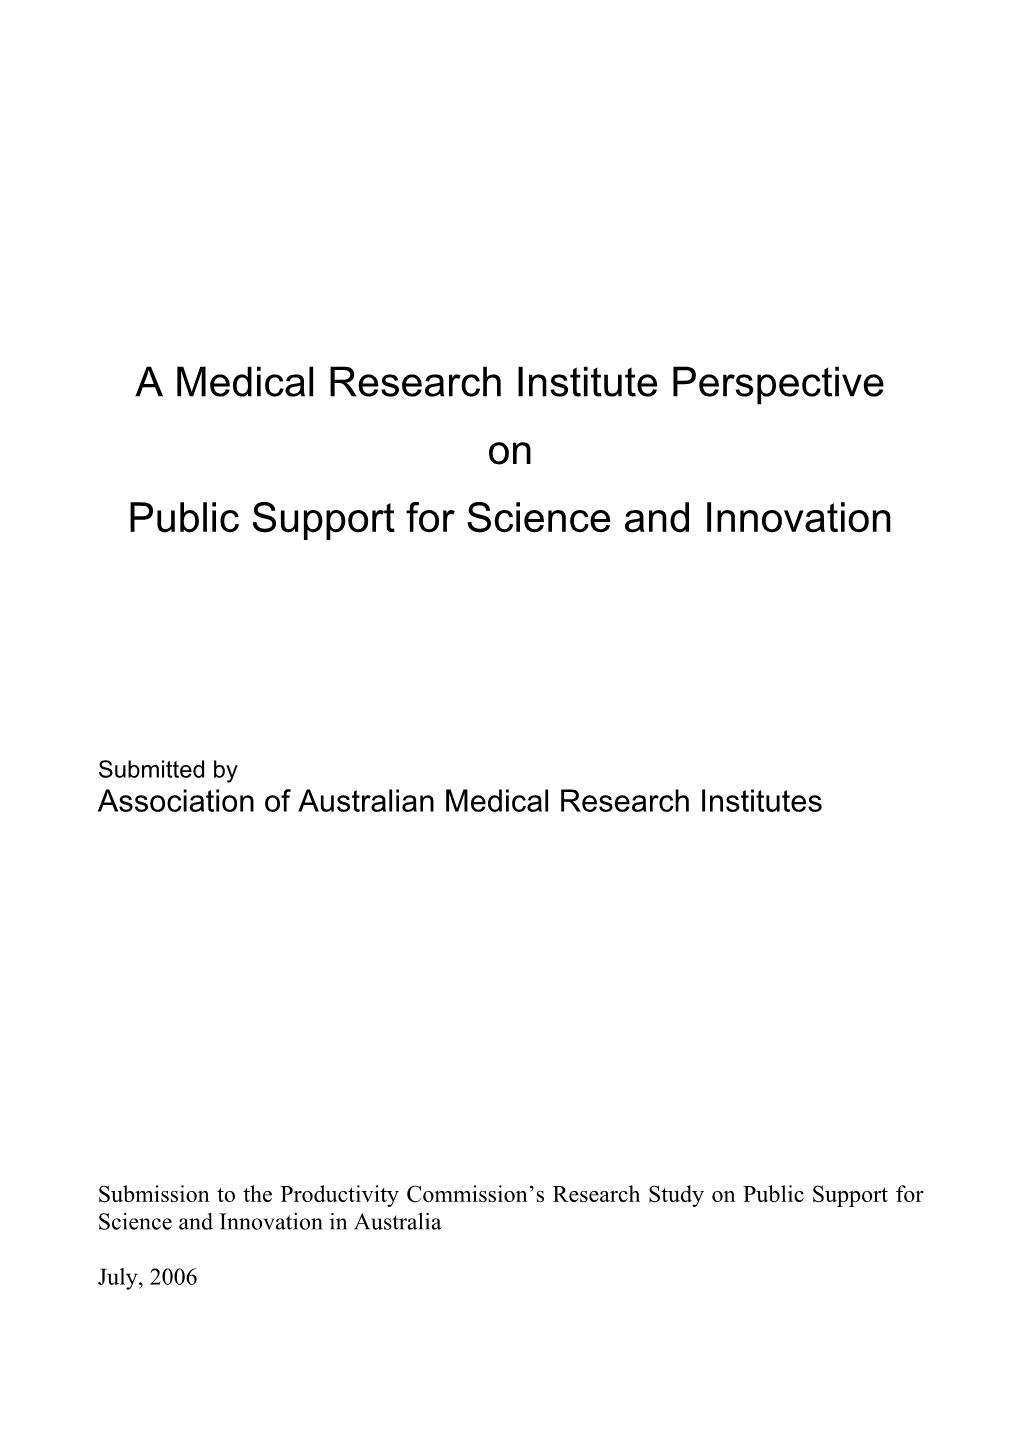 A Medical Research Institute Perspective on Public Support for Science and Innovation